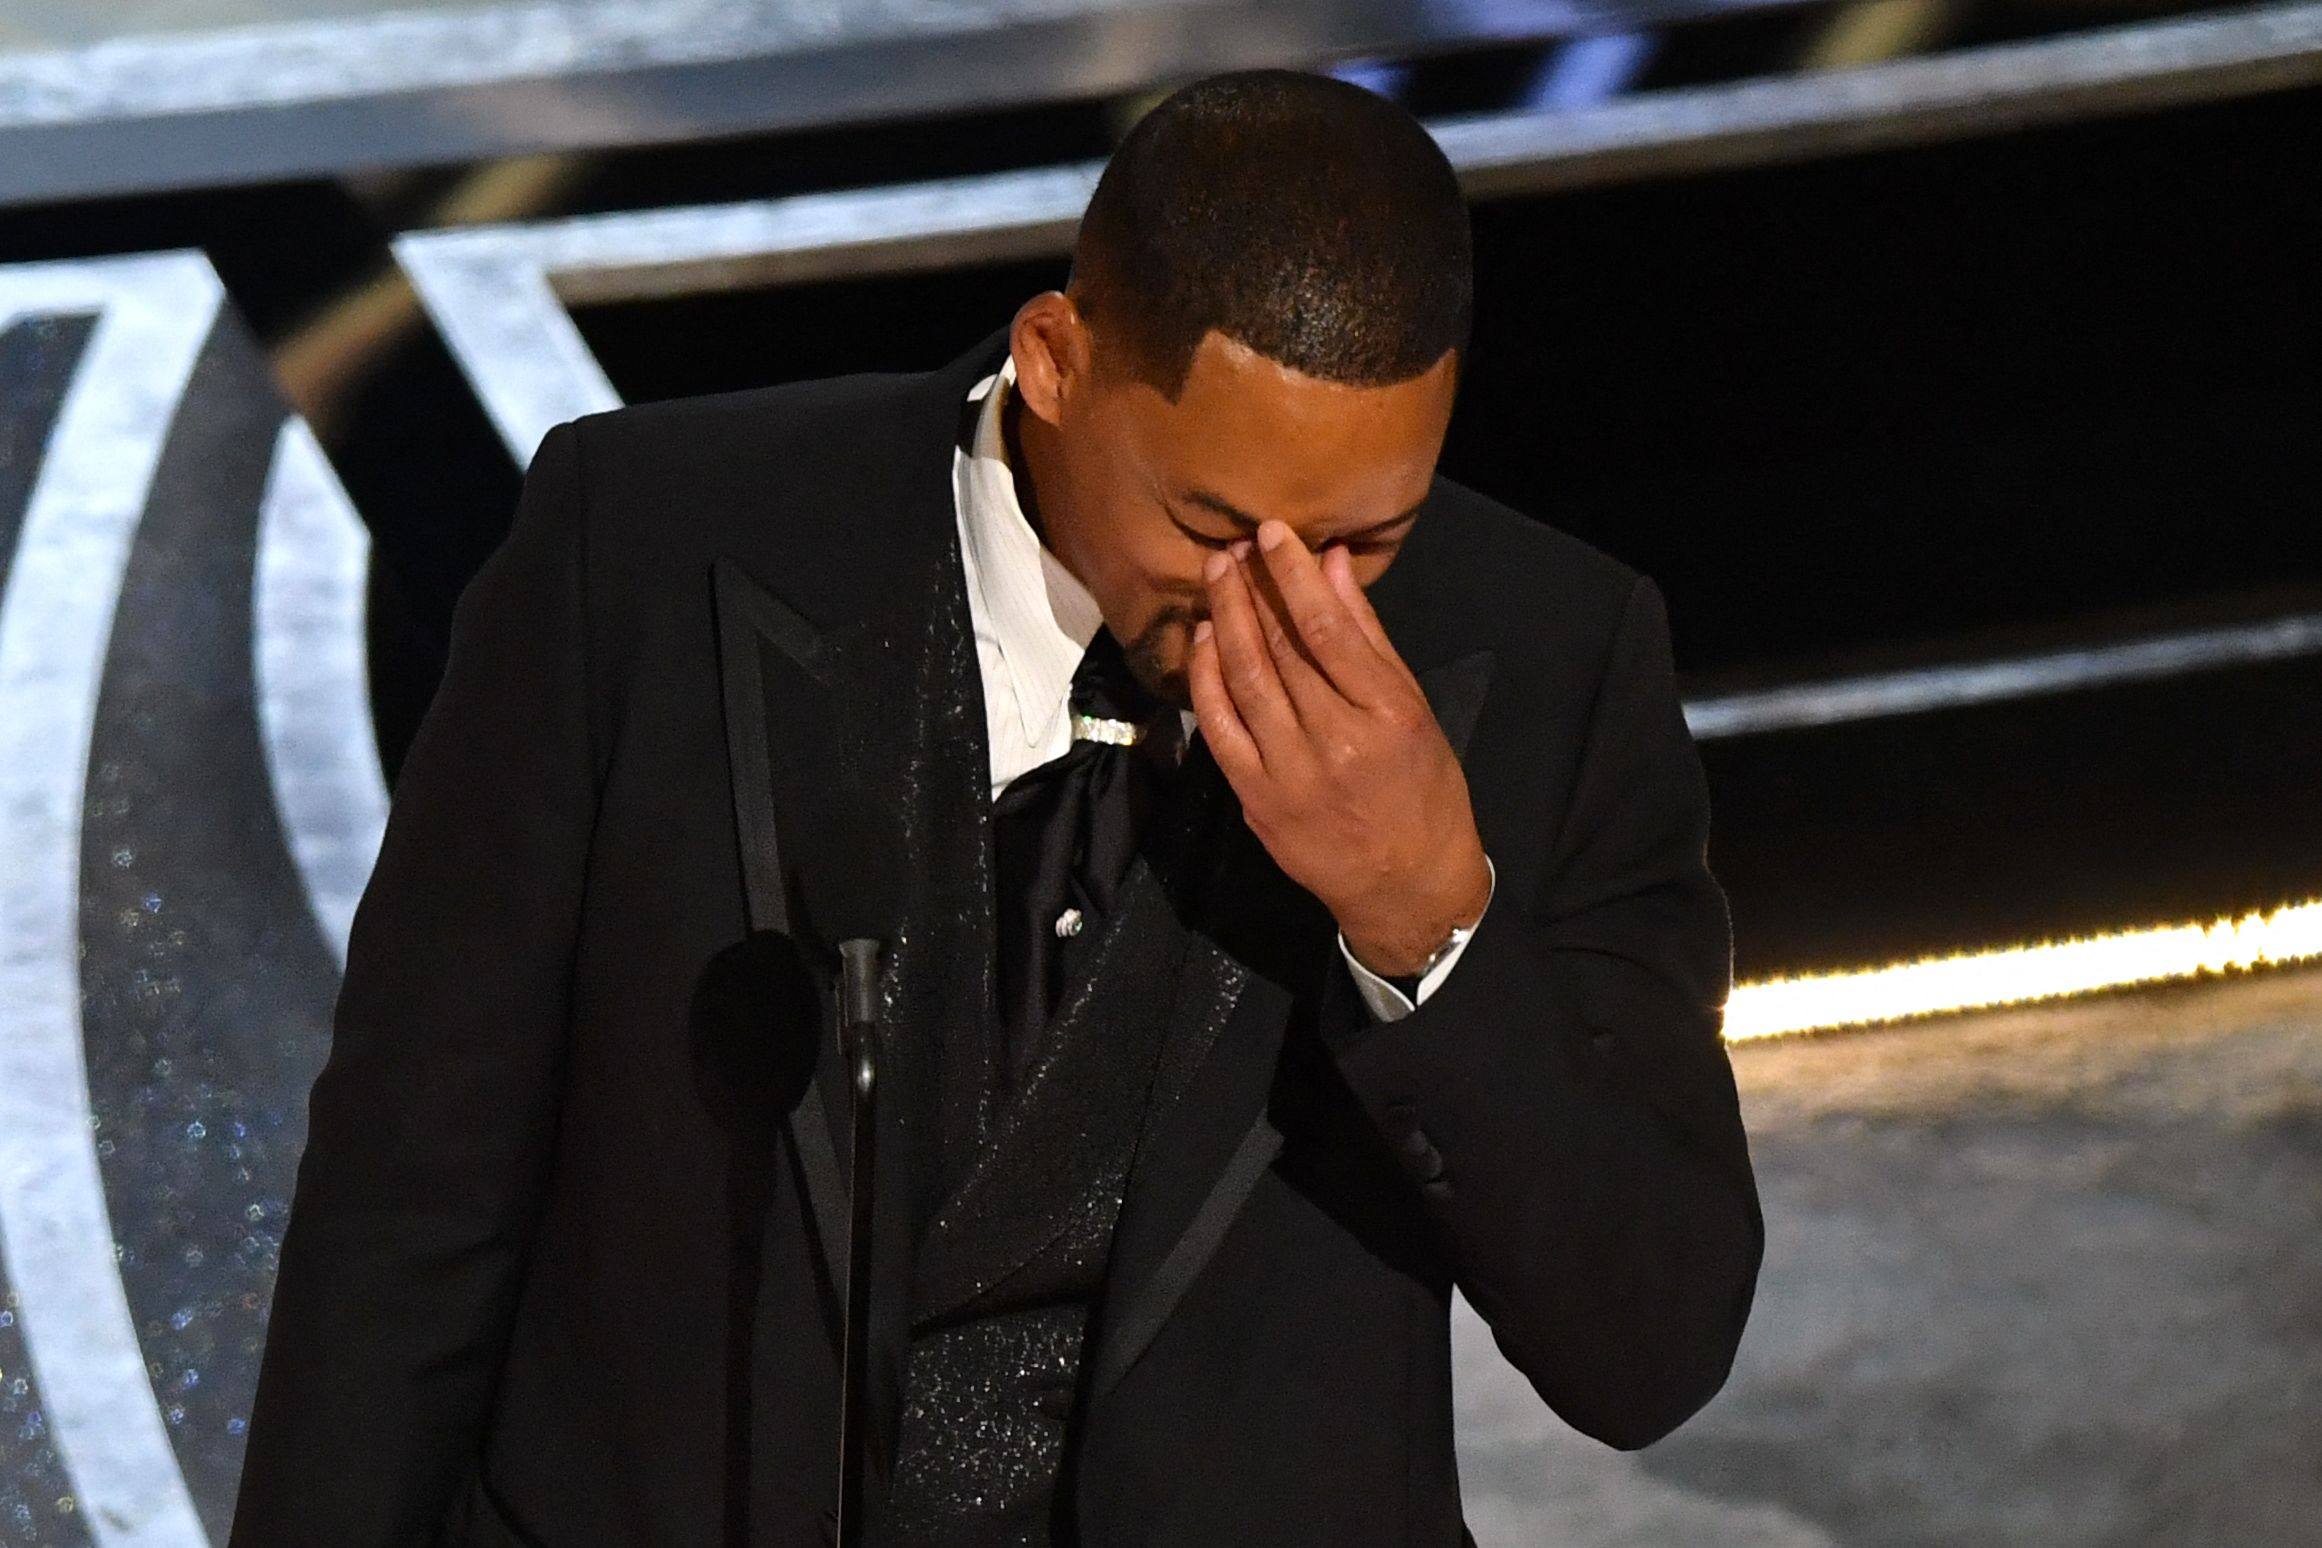 Will Smith accepts the award for best actor in a leading role for King Richard onstage during the 94th Oscars at the Dolby Theatre in Hollywood, California, on March 27. Photo: AFP